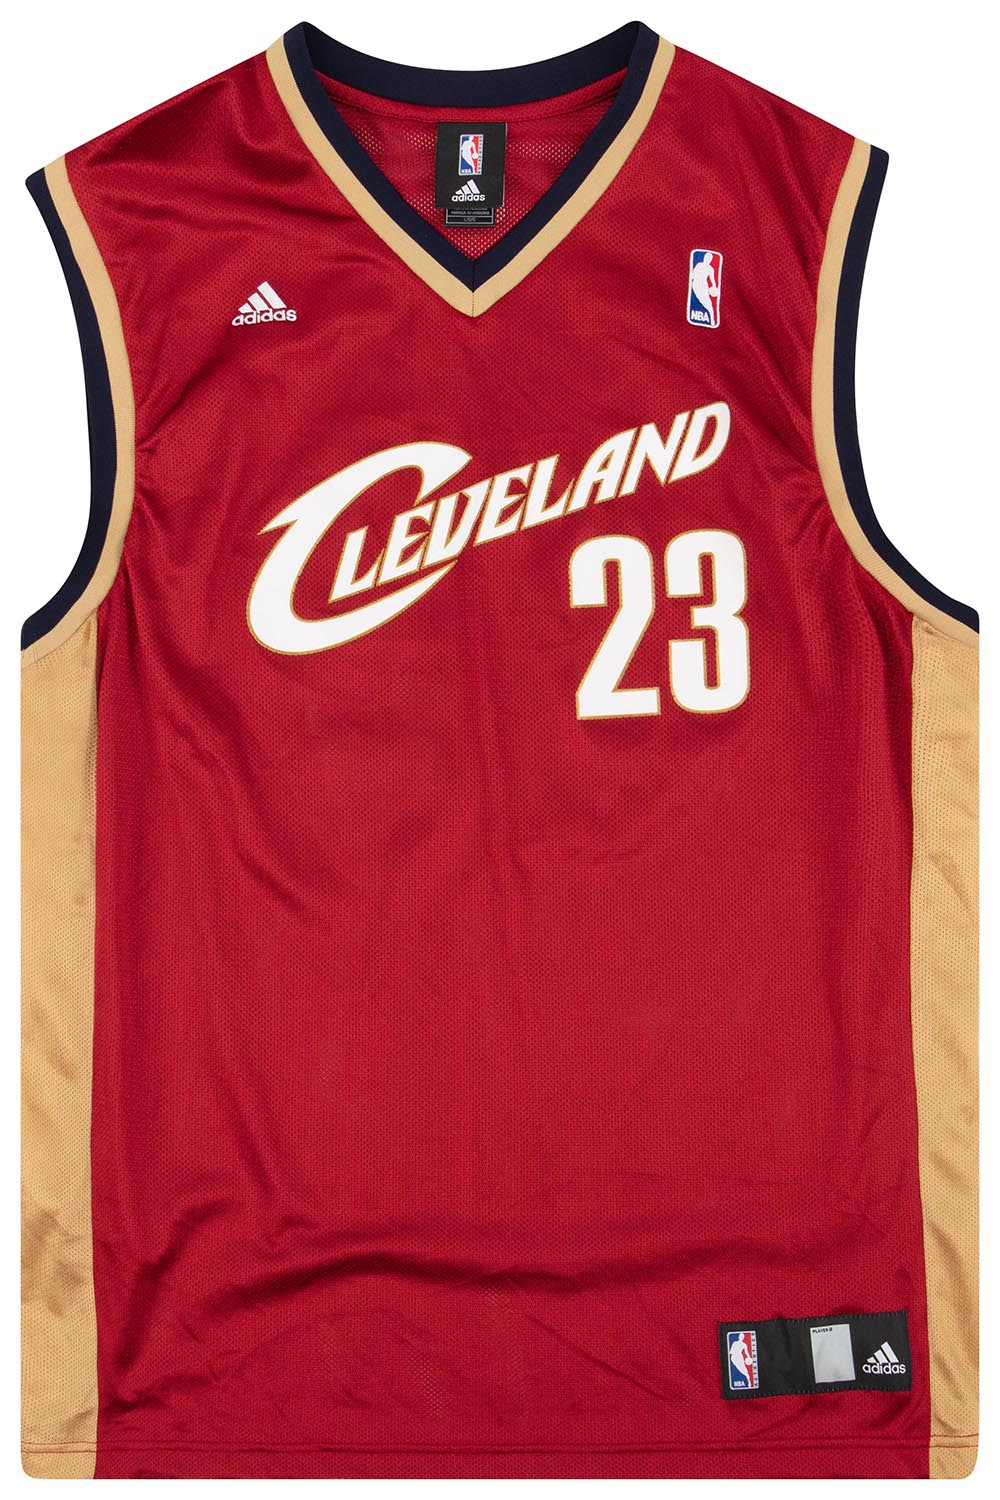 2006-10 CLEVELAND CAVALIERS JAMES #23 ADIDAS JERSEY (AWAY) L